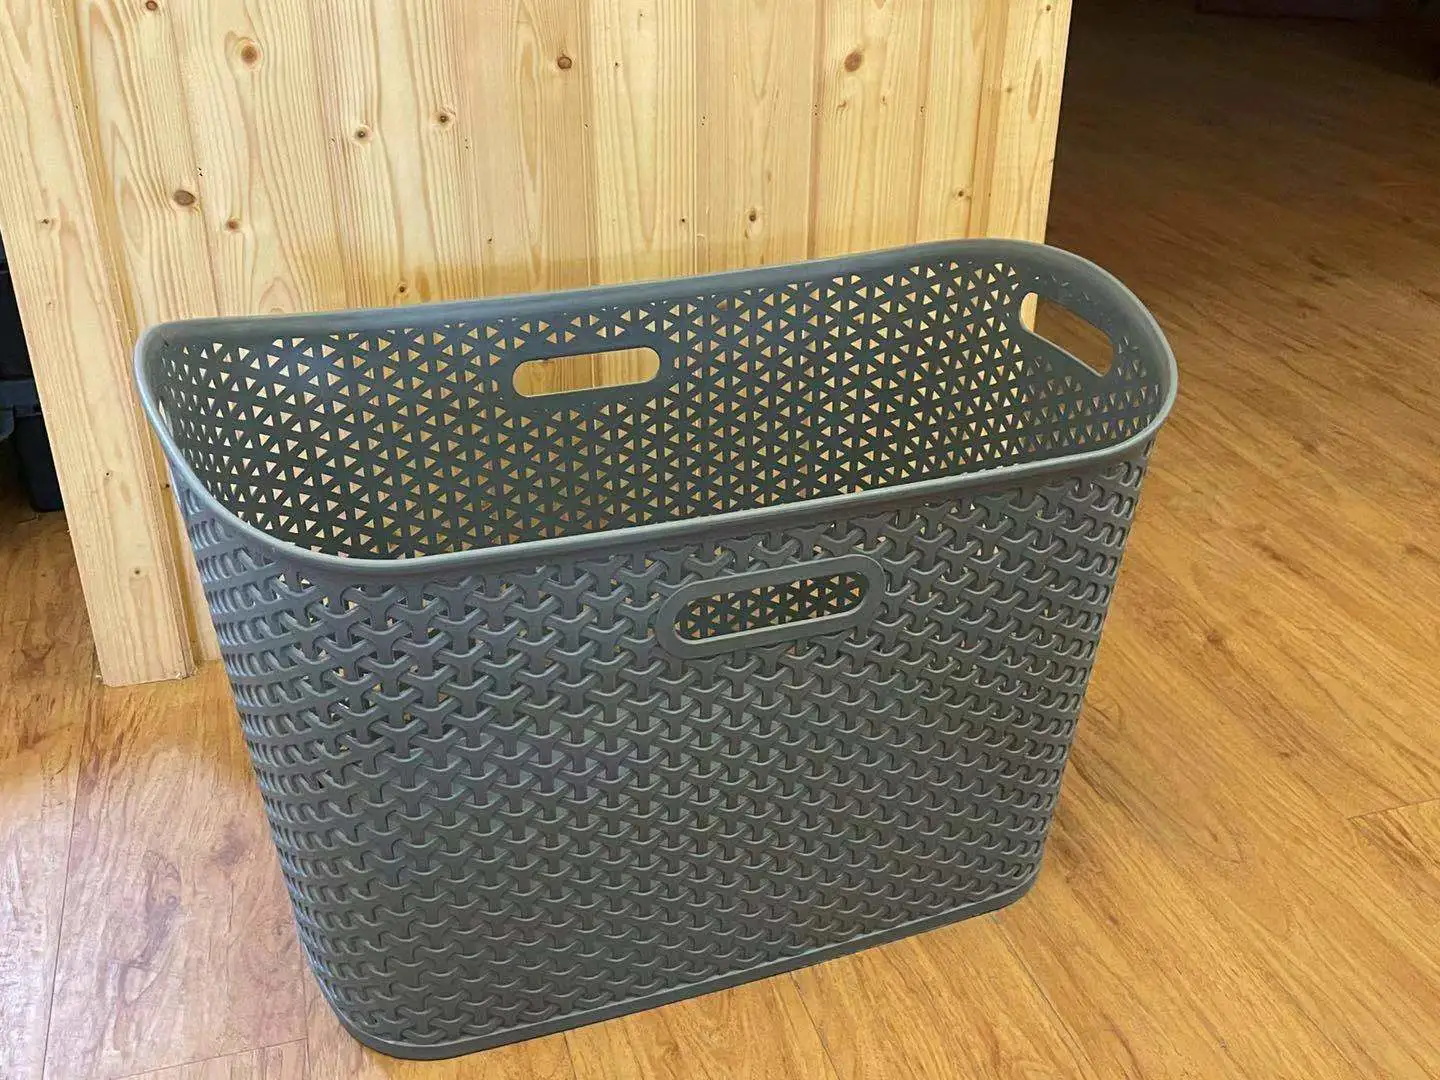 Plastic Wicker Laundry Basket has many different styles